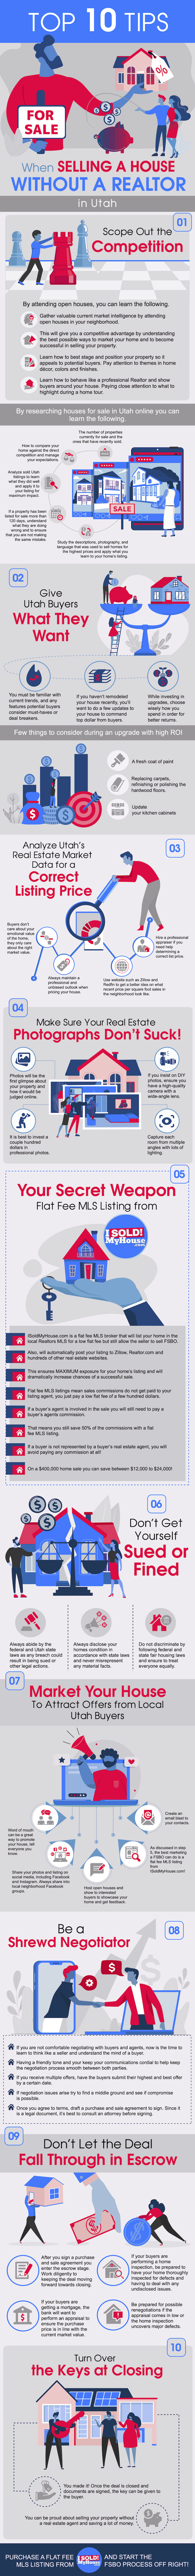 infographic of the 10 steps to sell a house in utah without an agent